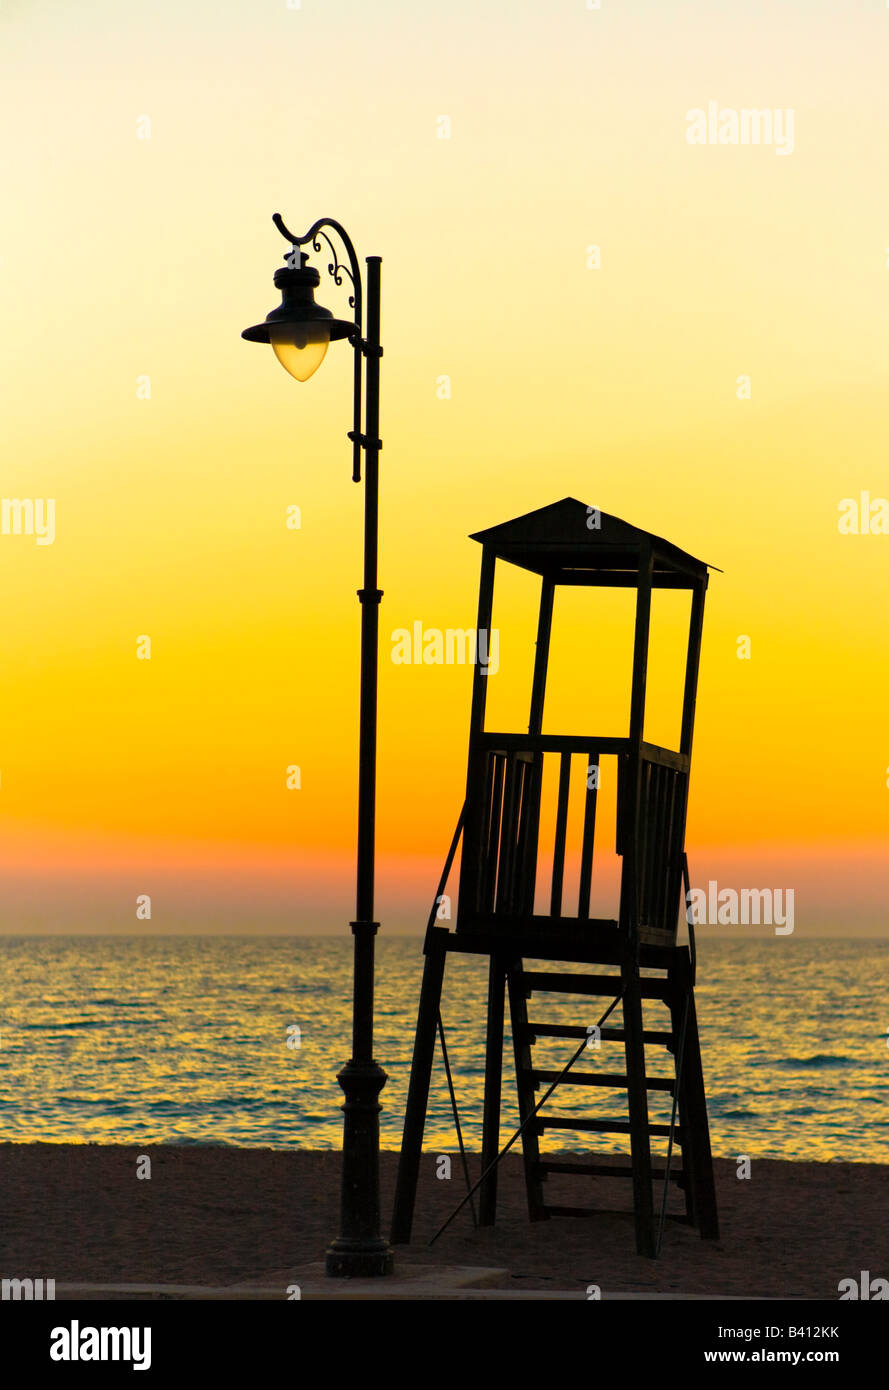 Life guard lookout Silhouette Stock Photo